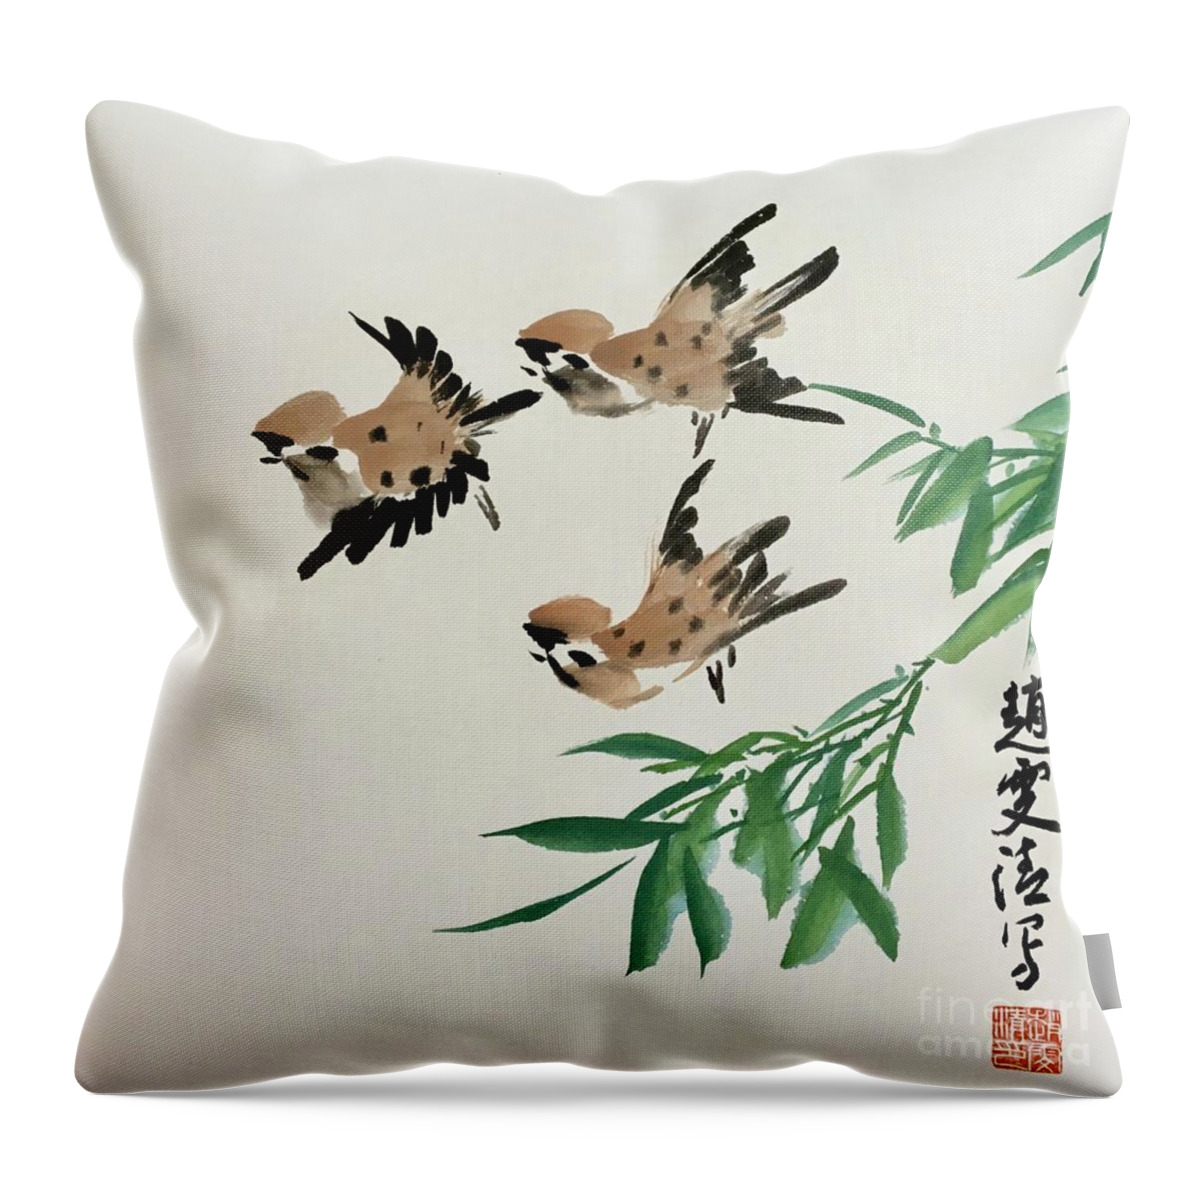 Spring Coming Throw Pillow featuring the painting Spring Coming by Carmen Lam